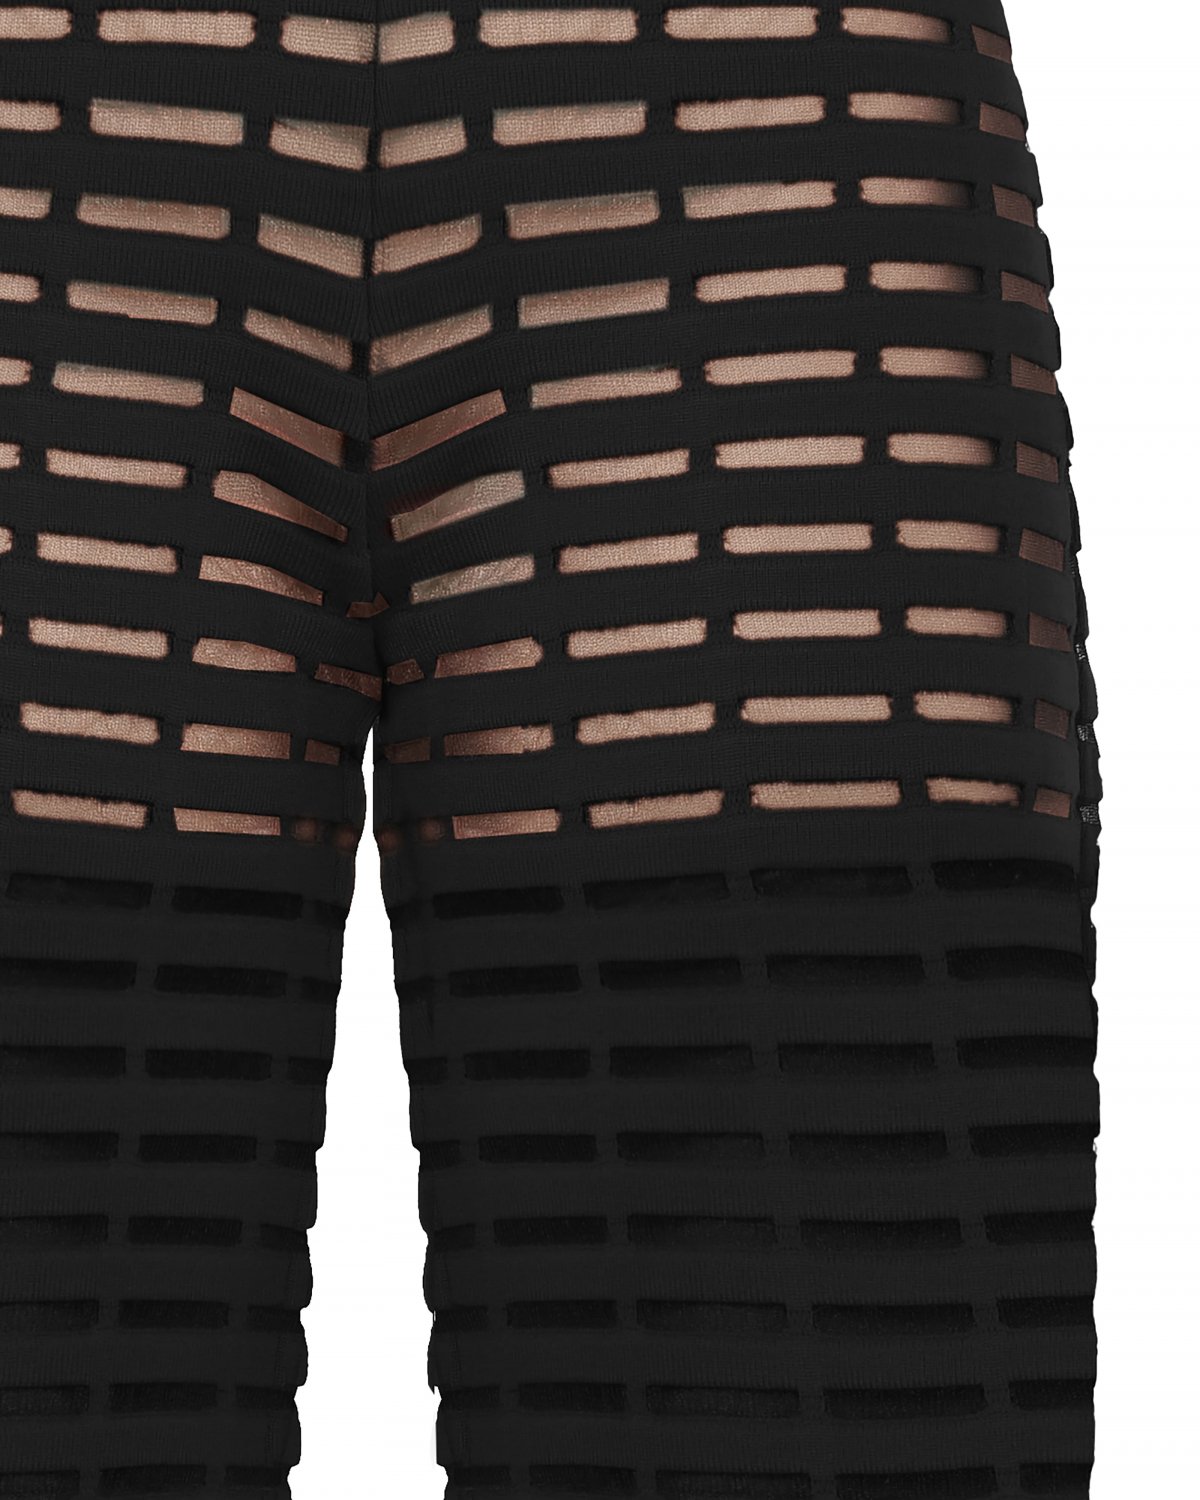 Black knit iconic leggings | Iconic Capsule Collection, 73_74 | Genny